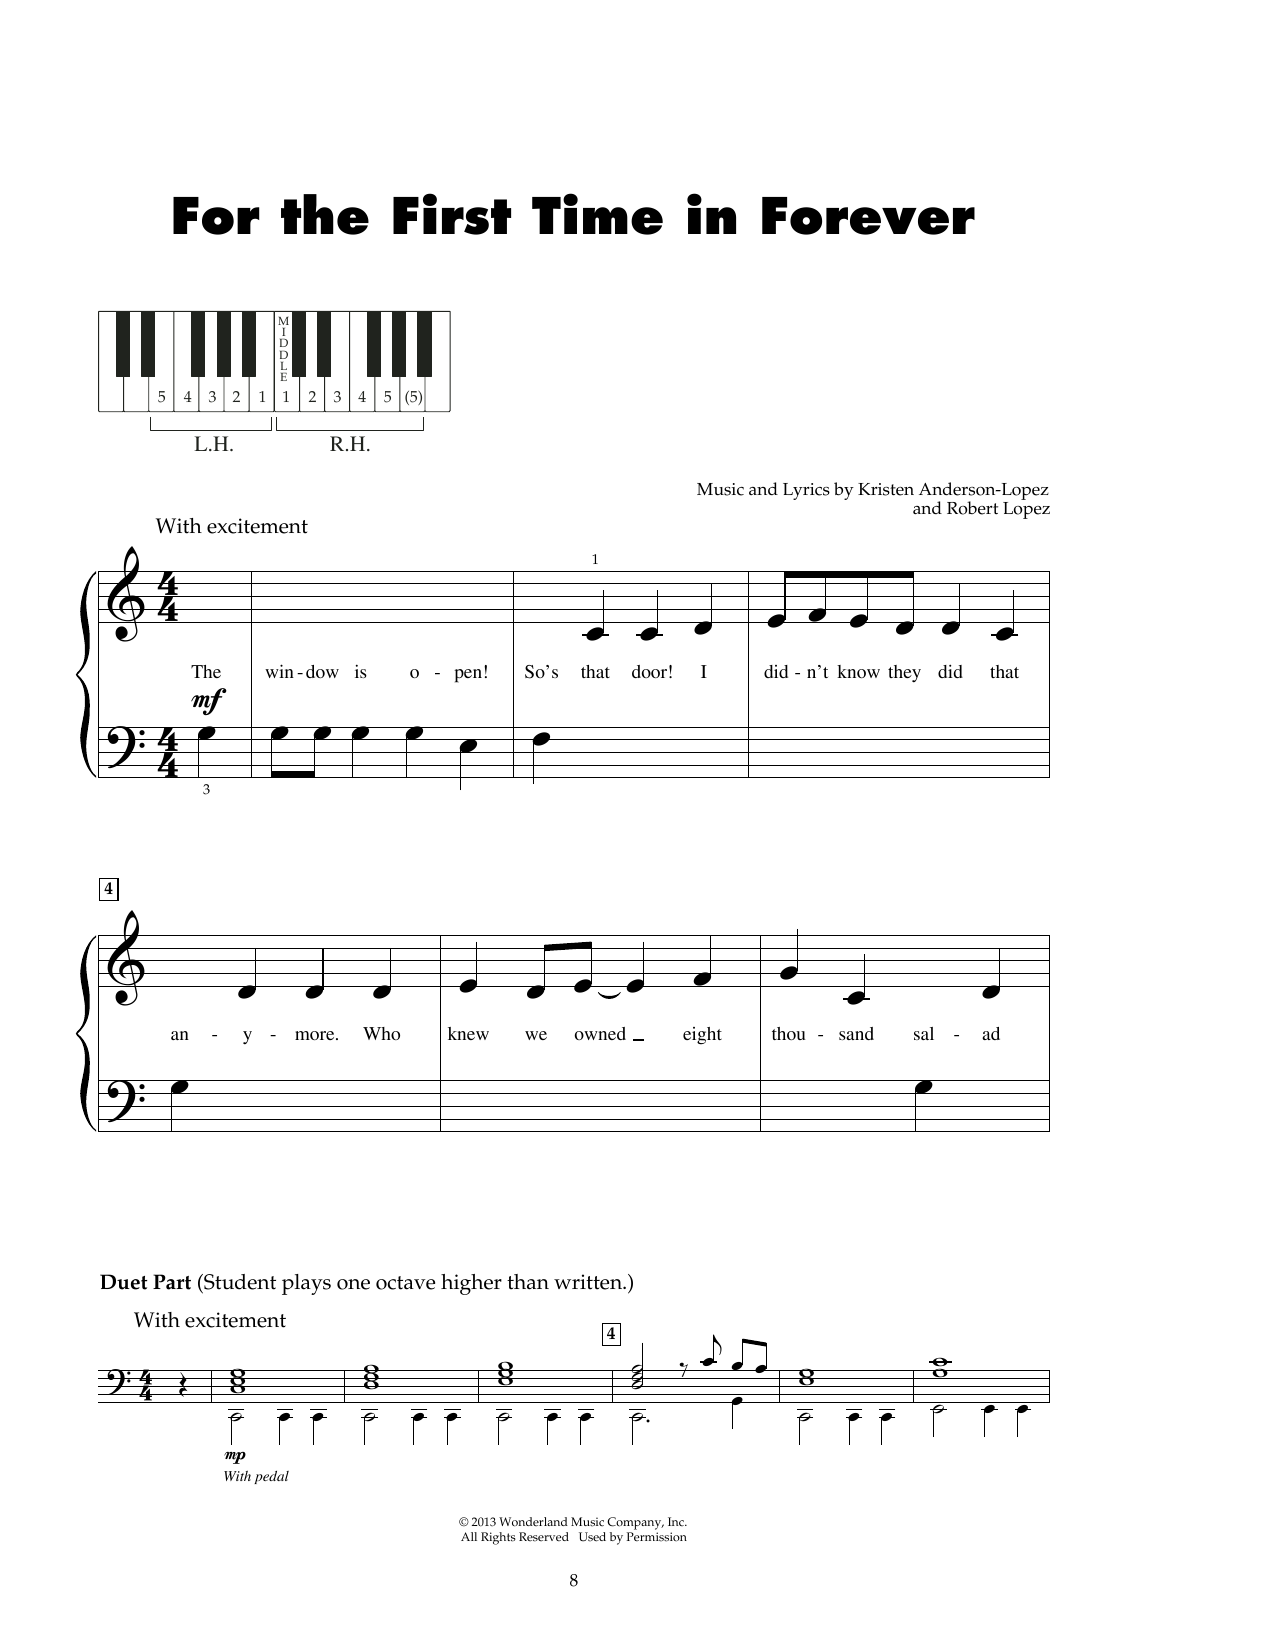 Download Kristen Bell & Idina Menzel For The First Time In Forever (from Fro Sheet Music